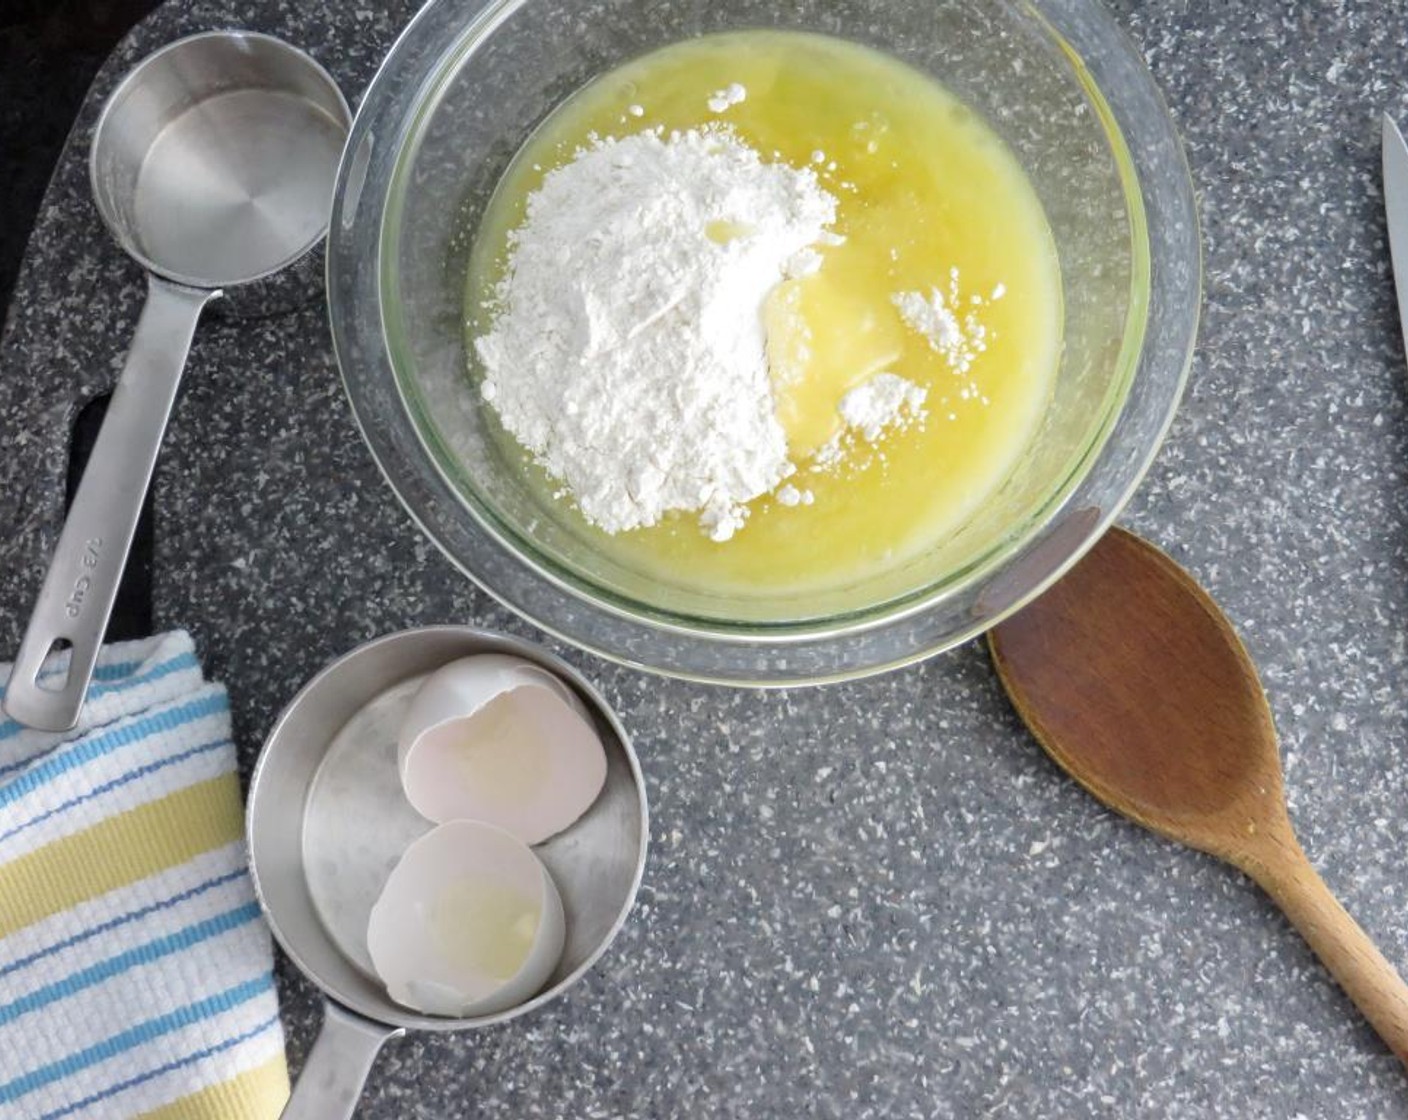 step 12 In a small bowl, add Butter (1/3 cup), Granulated Sugar (1 cup), Egg (1), 1/2 teaspoon zest of Lemon (1), and All-Purpose Flour (1/3 cup), mixing with a fork until combined.